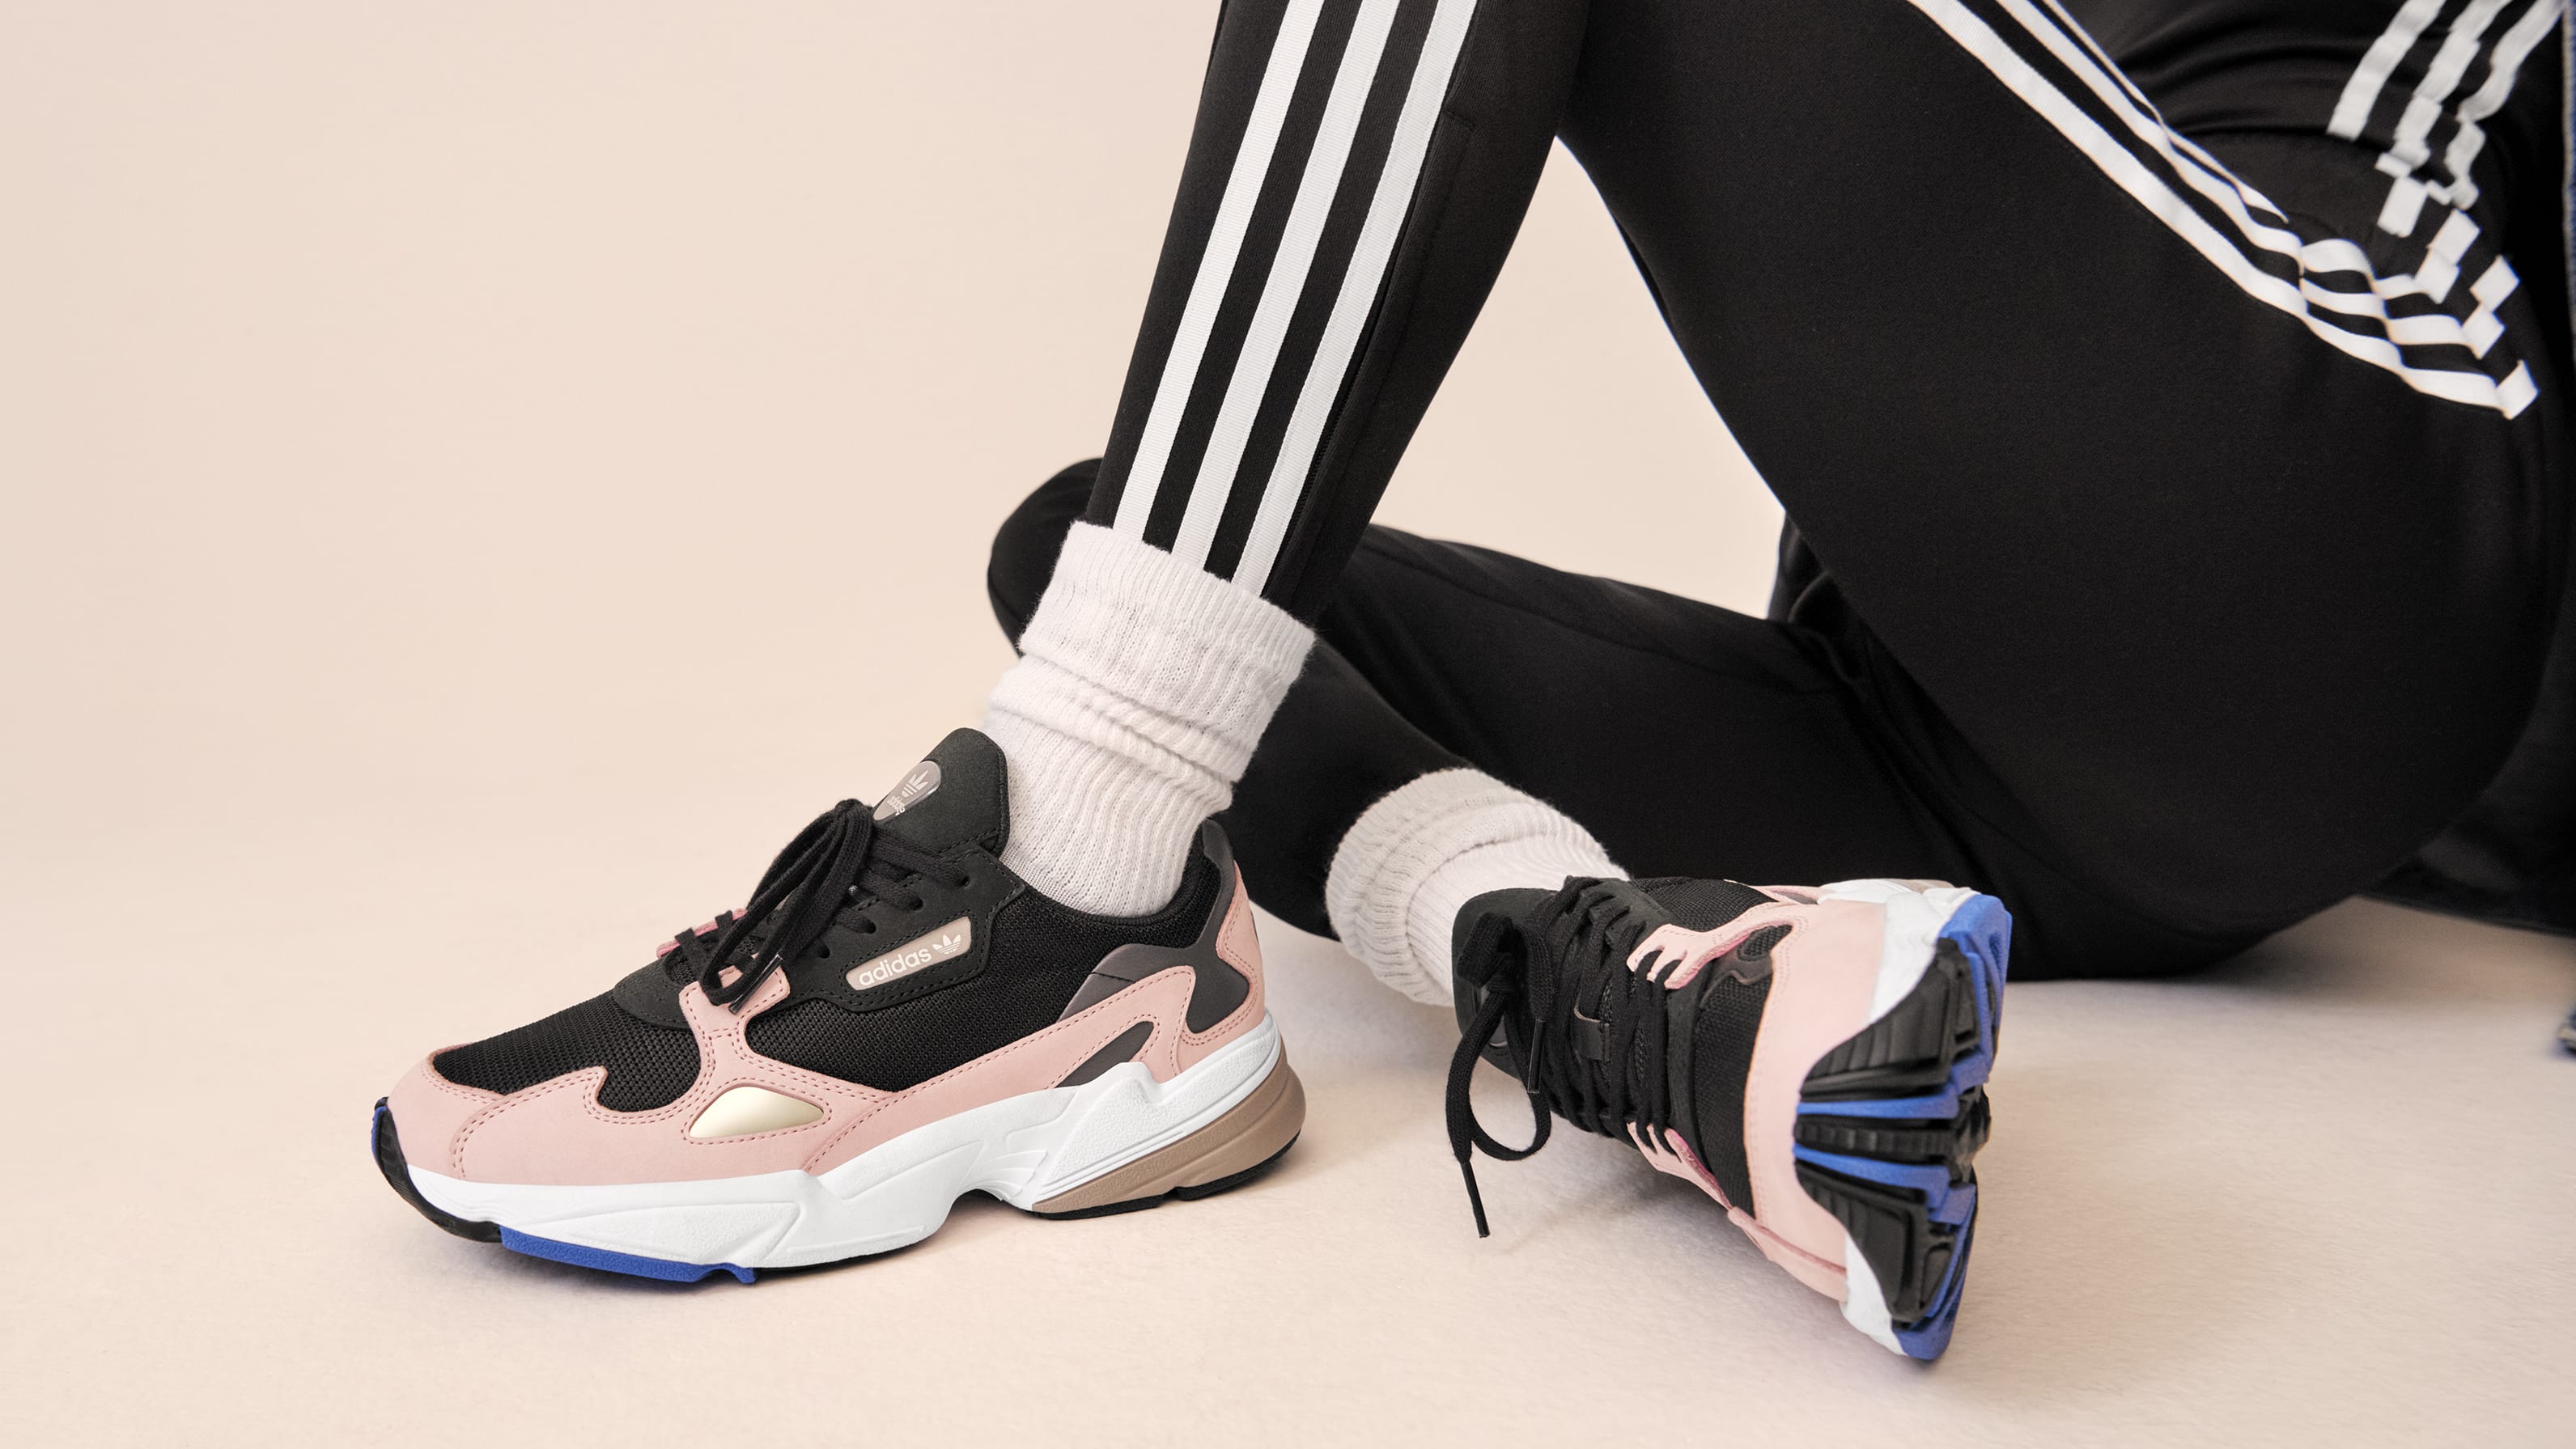 Humanista Paisaje Será Kylie Jenner Is the New Face of the Adidas Falcon | Complex